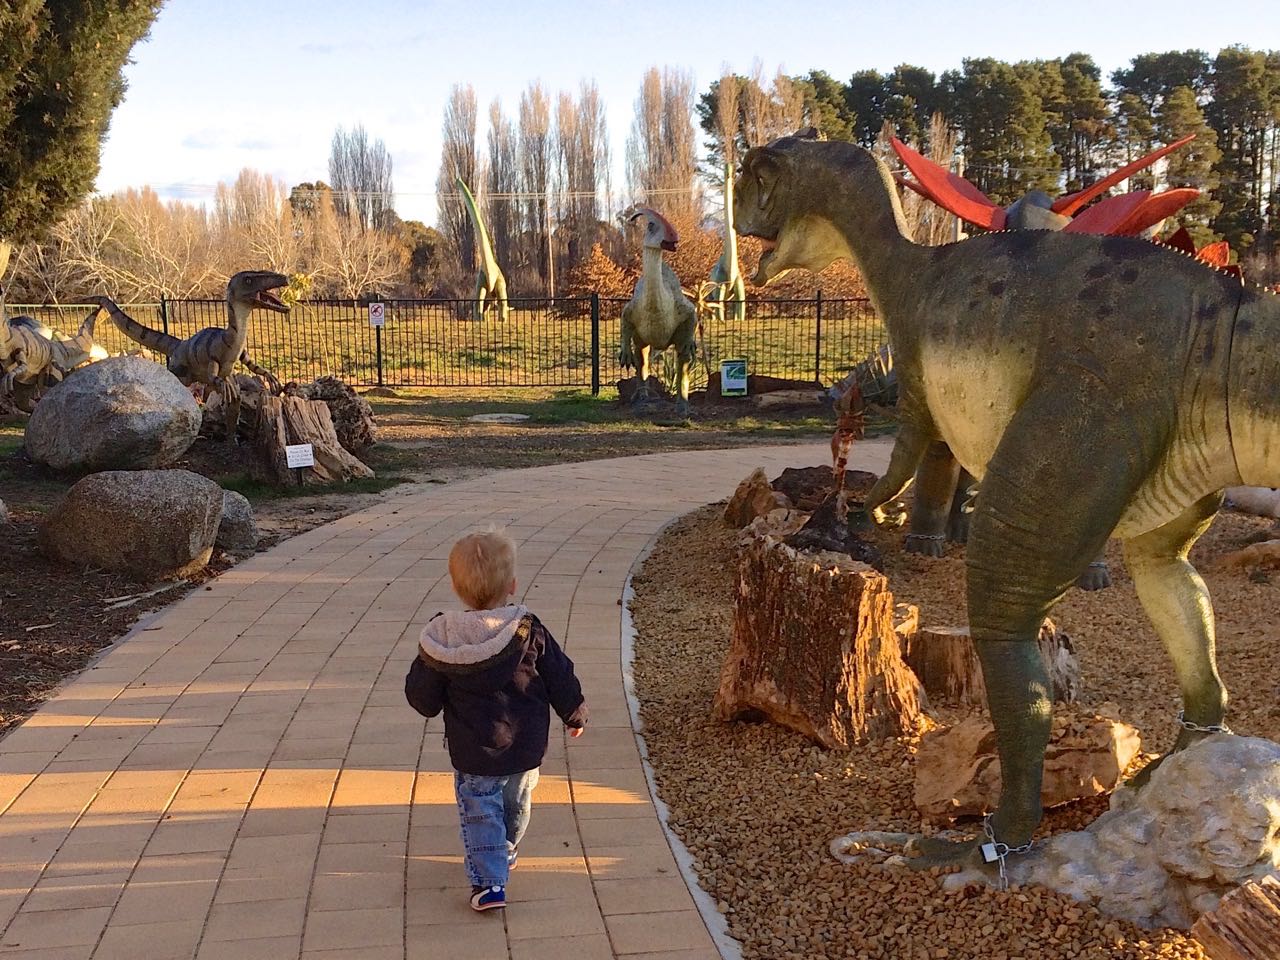 National Dinosaur museum in Canberra